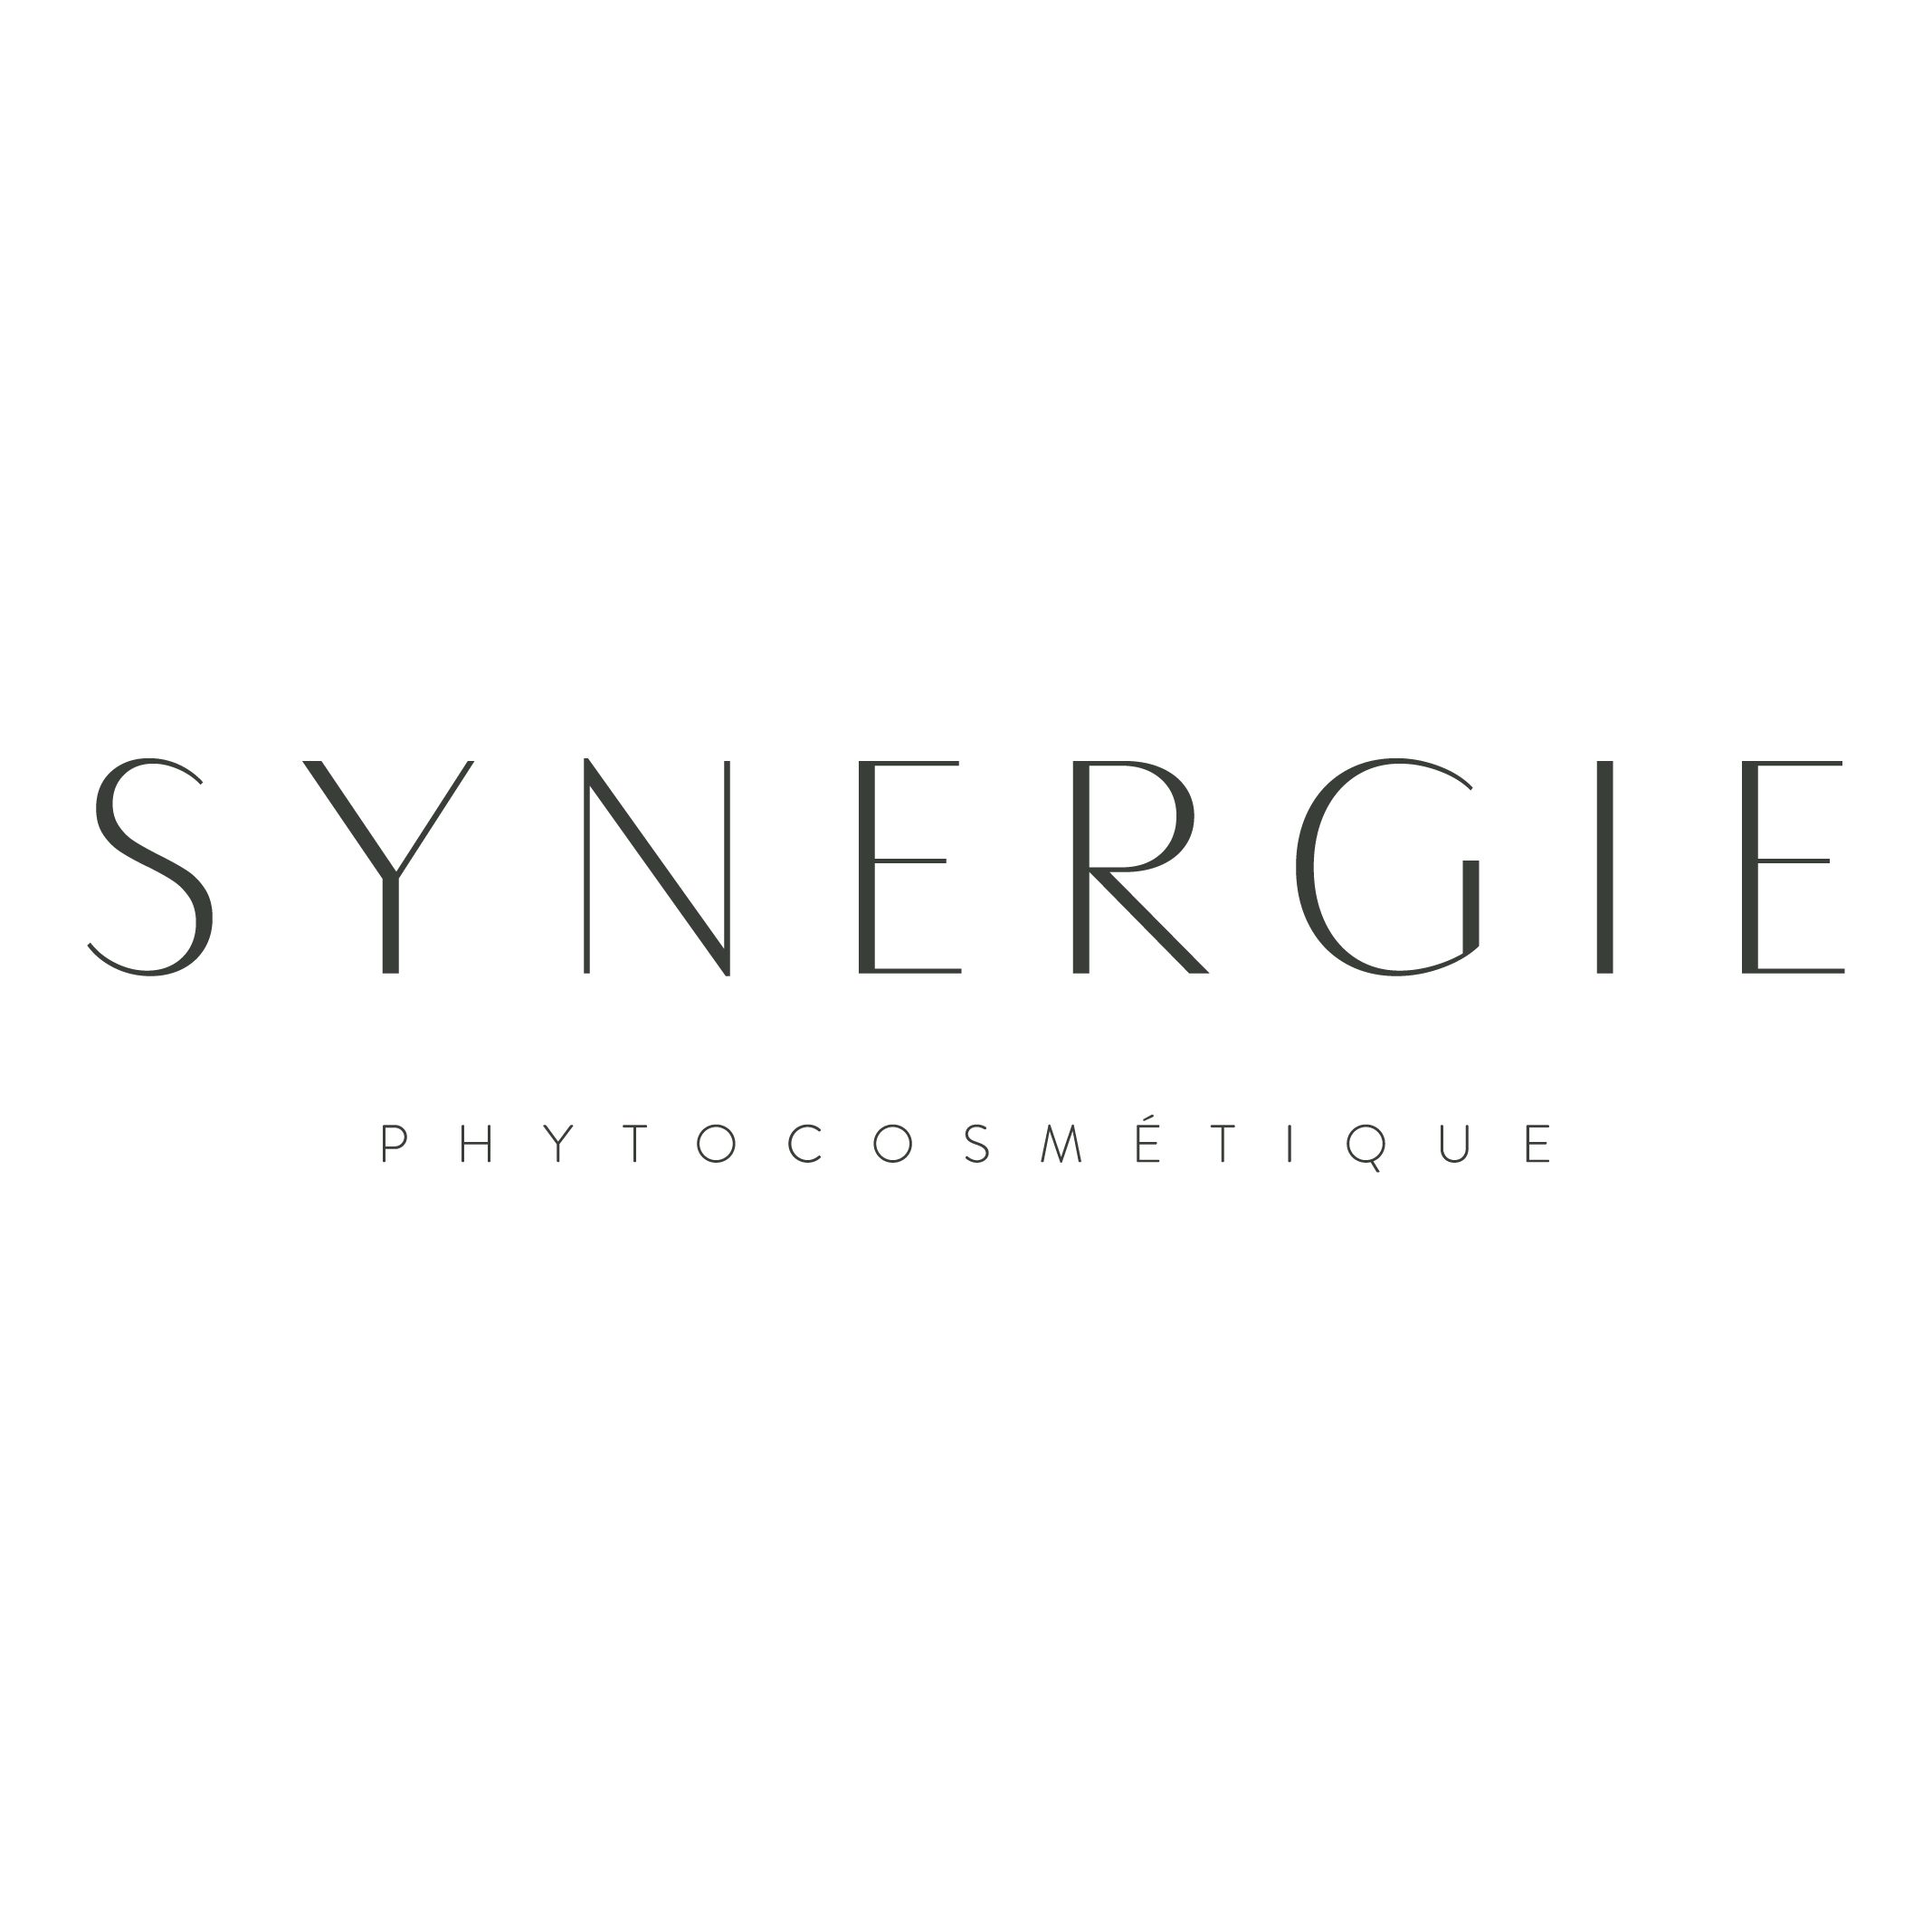 Annuaire Synergie Phytocosmétique